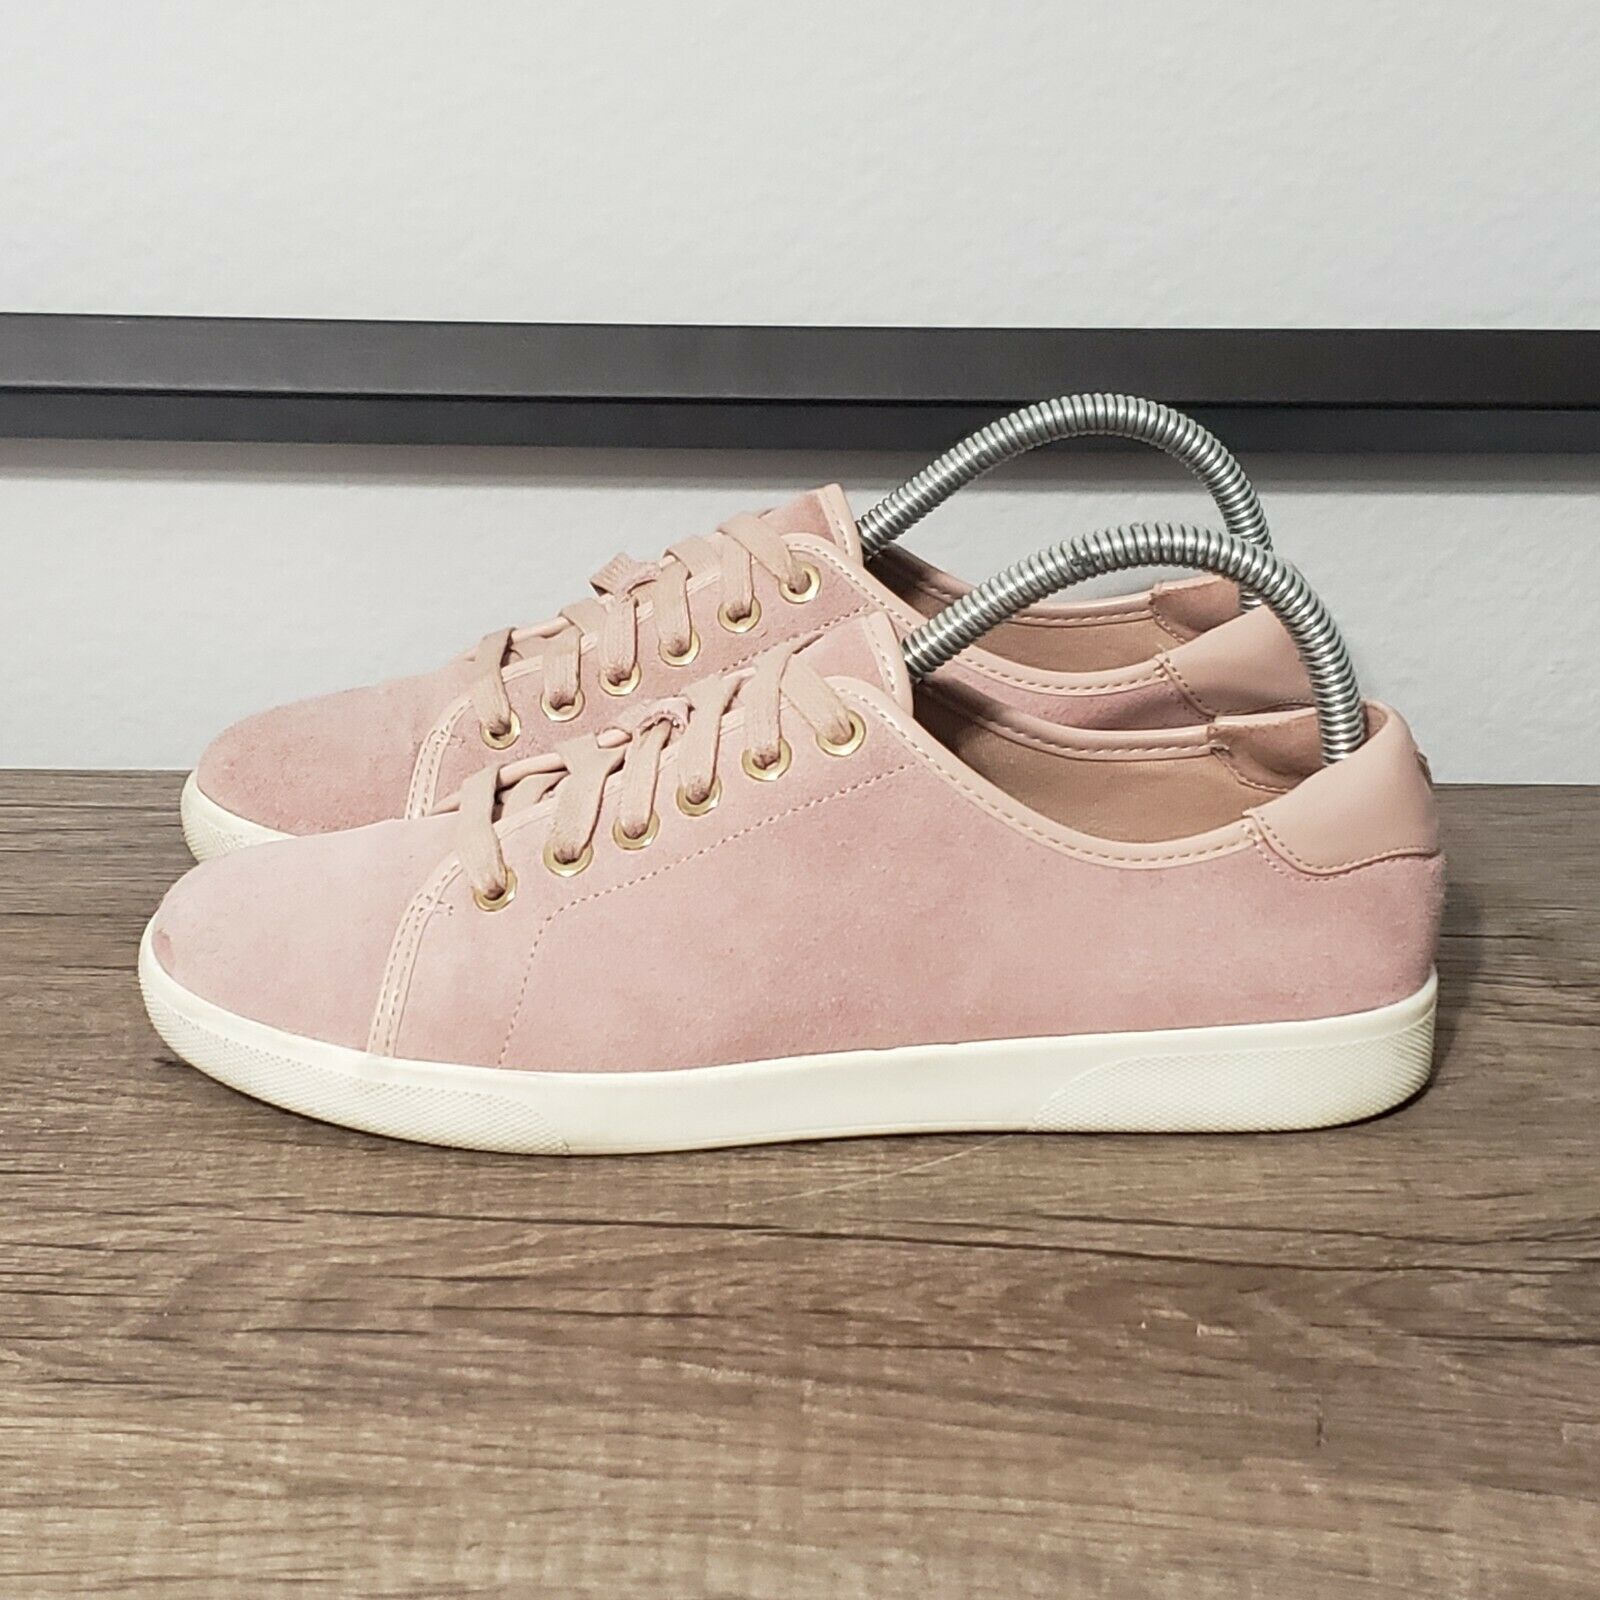 Vionic Brinley Women's Casual Shoes Size 7.5 Light Pink Suede